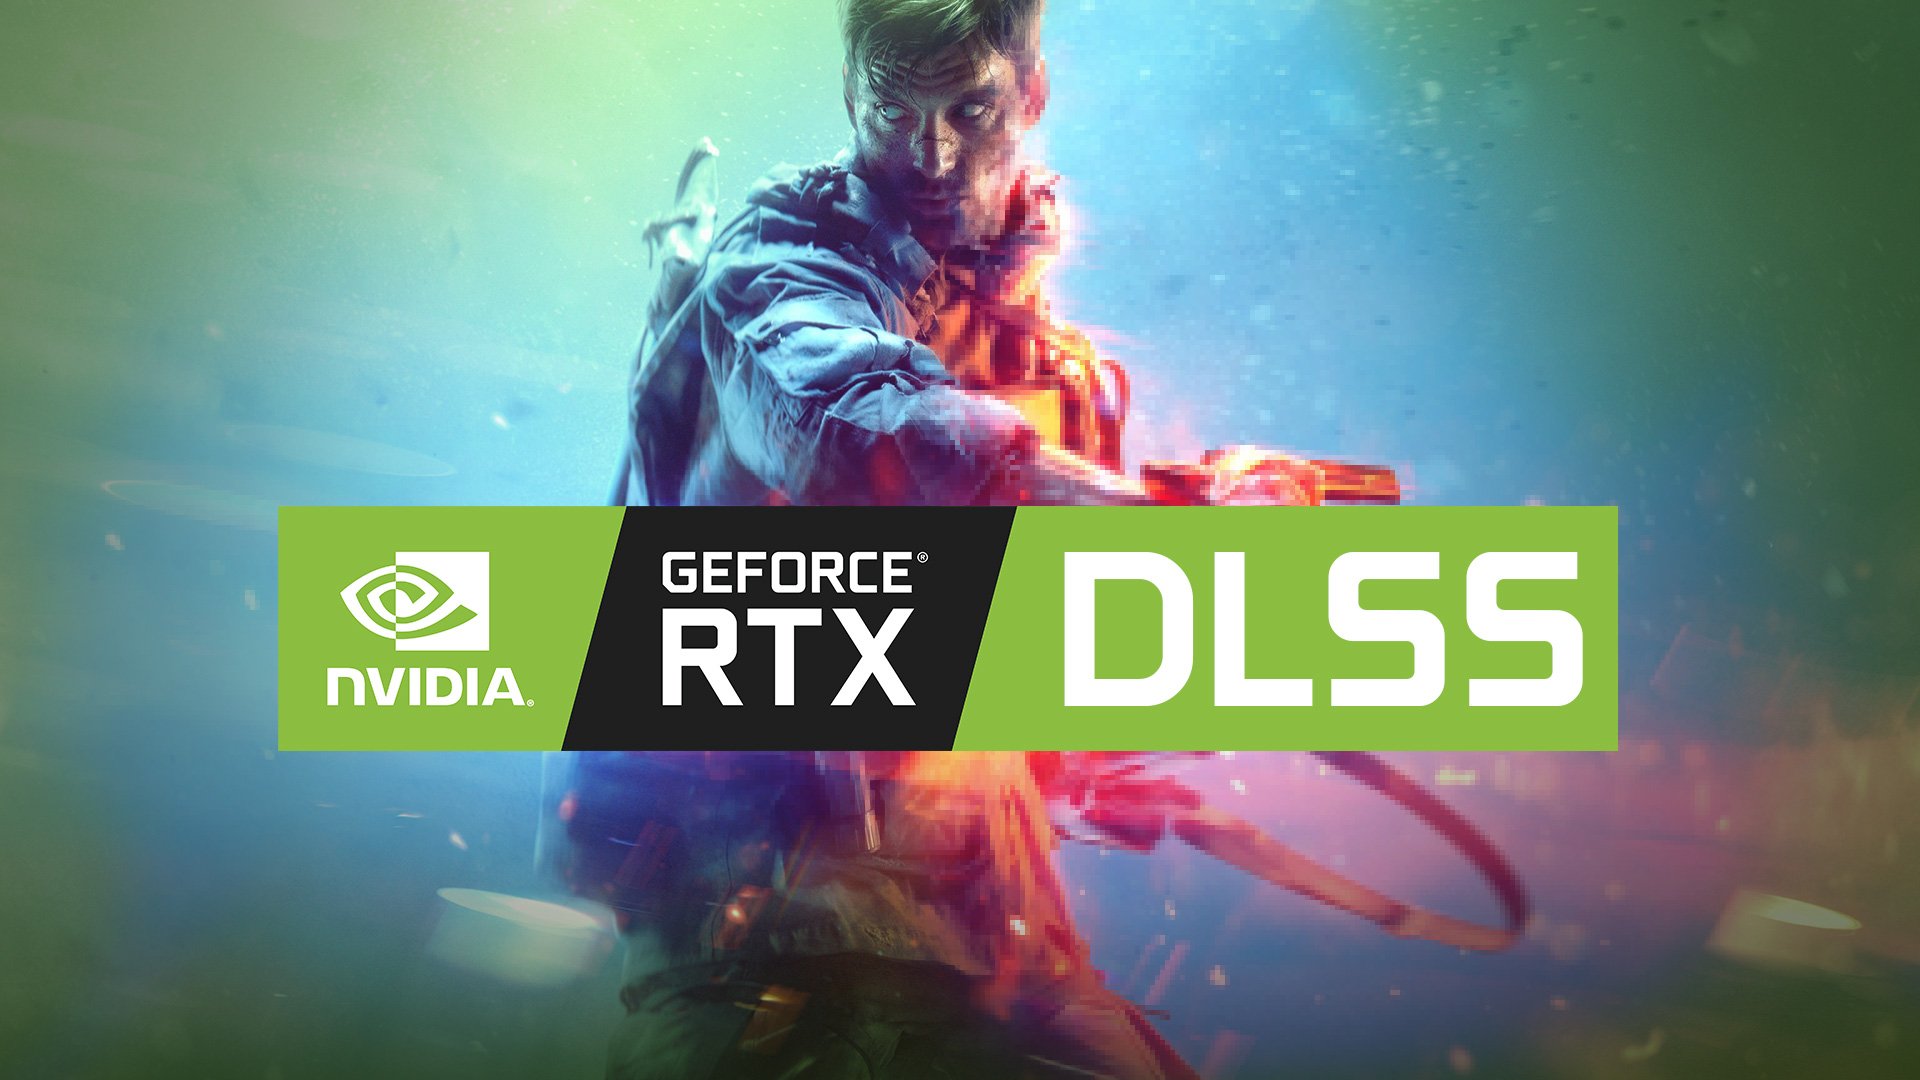 NVIDIA Adds Full DLSS Support to Linux